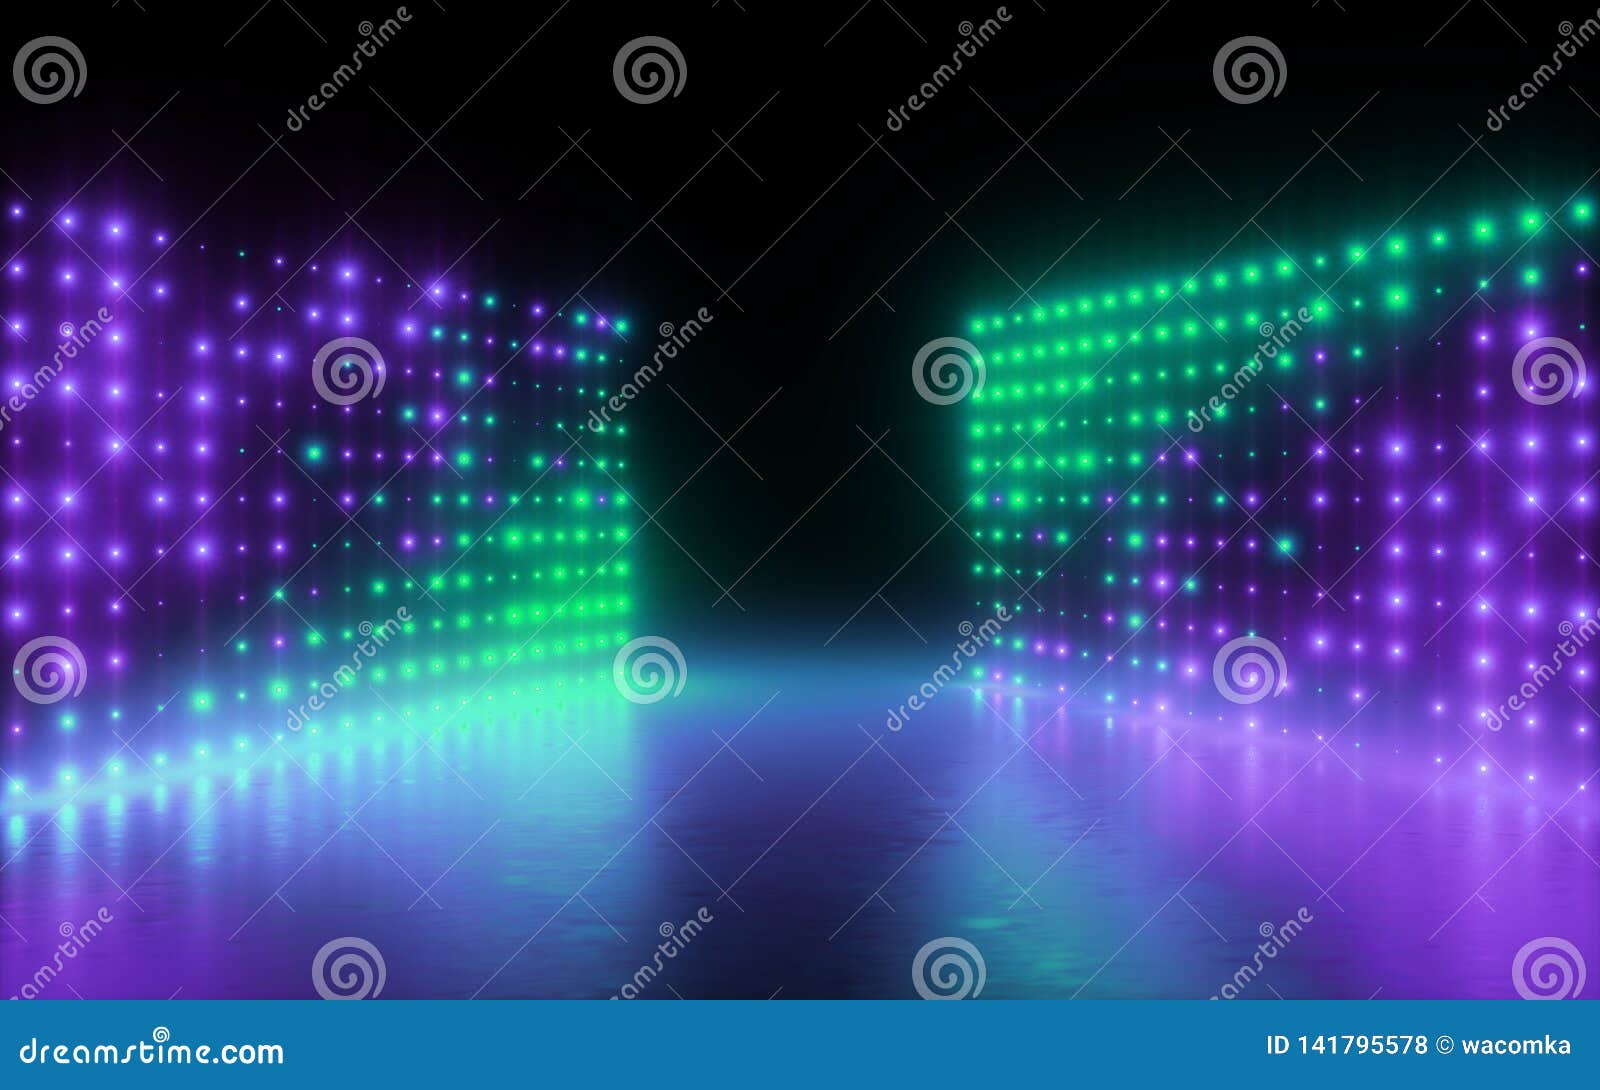 d render abstract background screen pixels glowing dots neon lights virtual reality ultraviolet spectrum pink blue vibrant colors 141795578